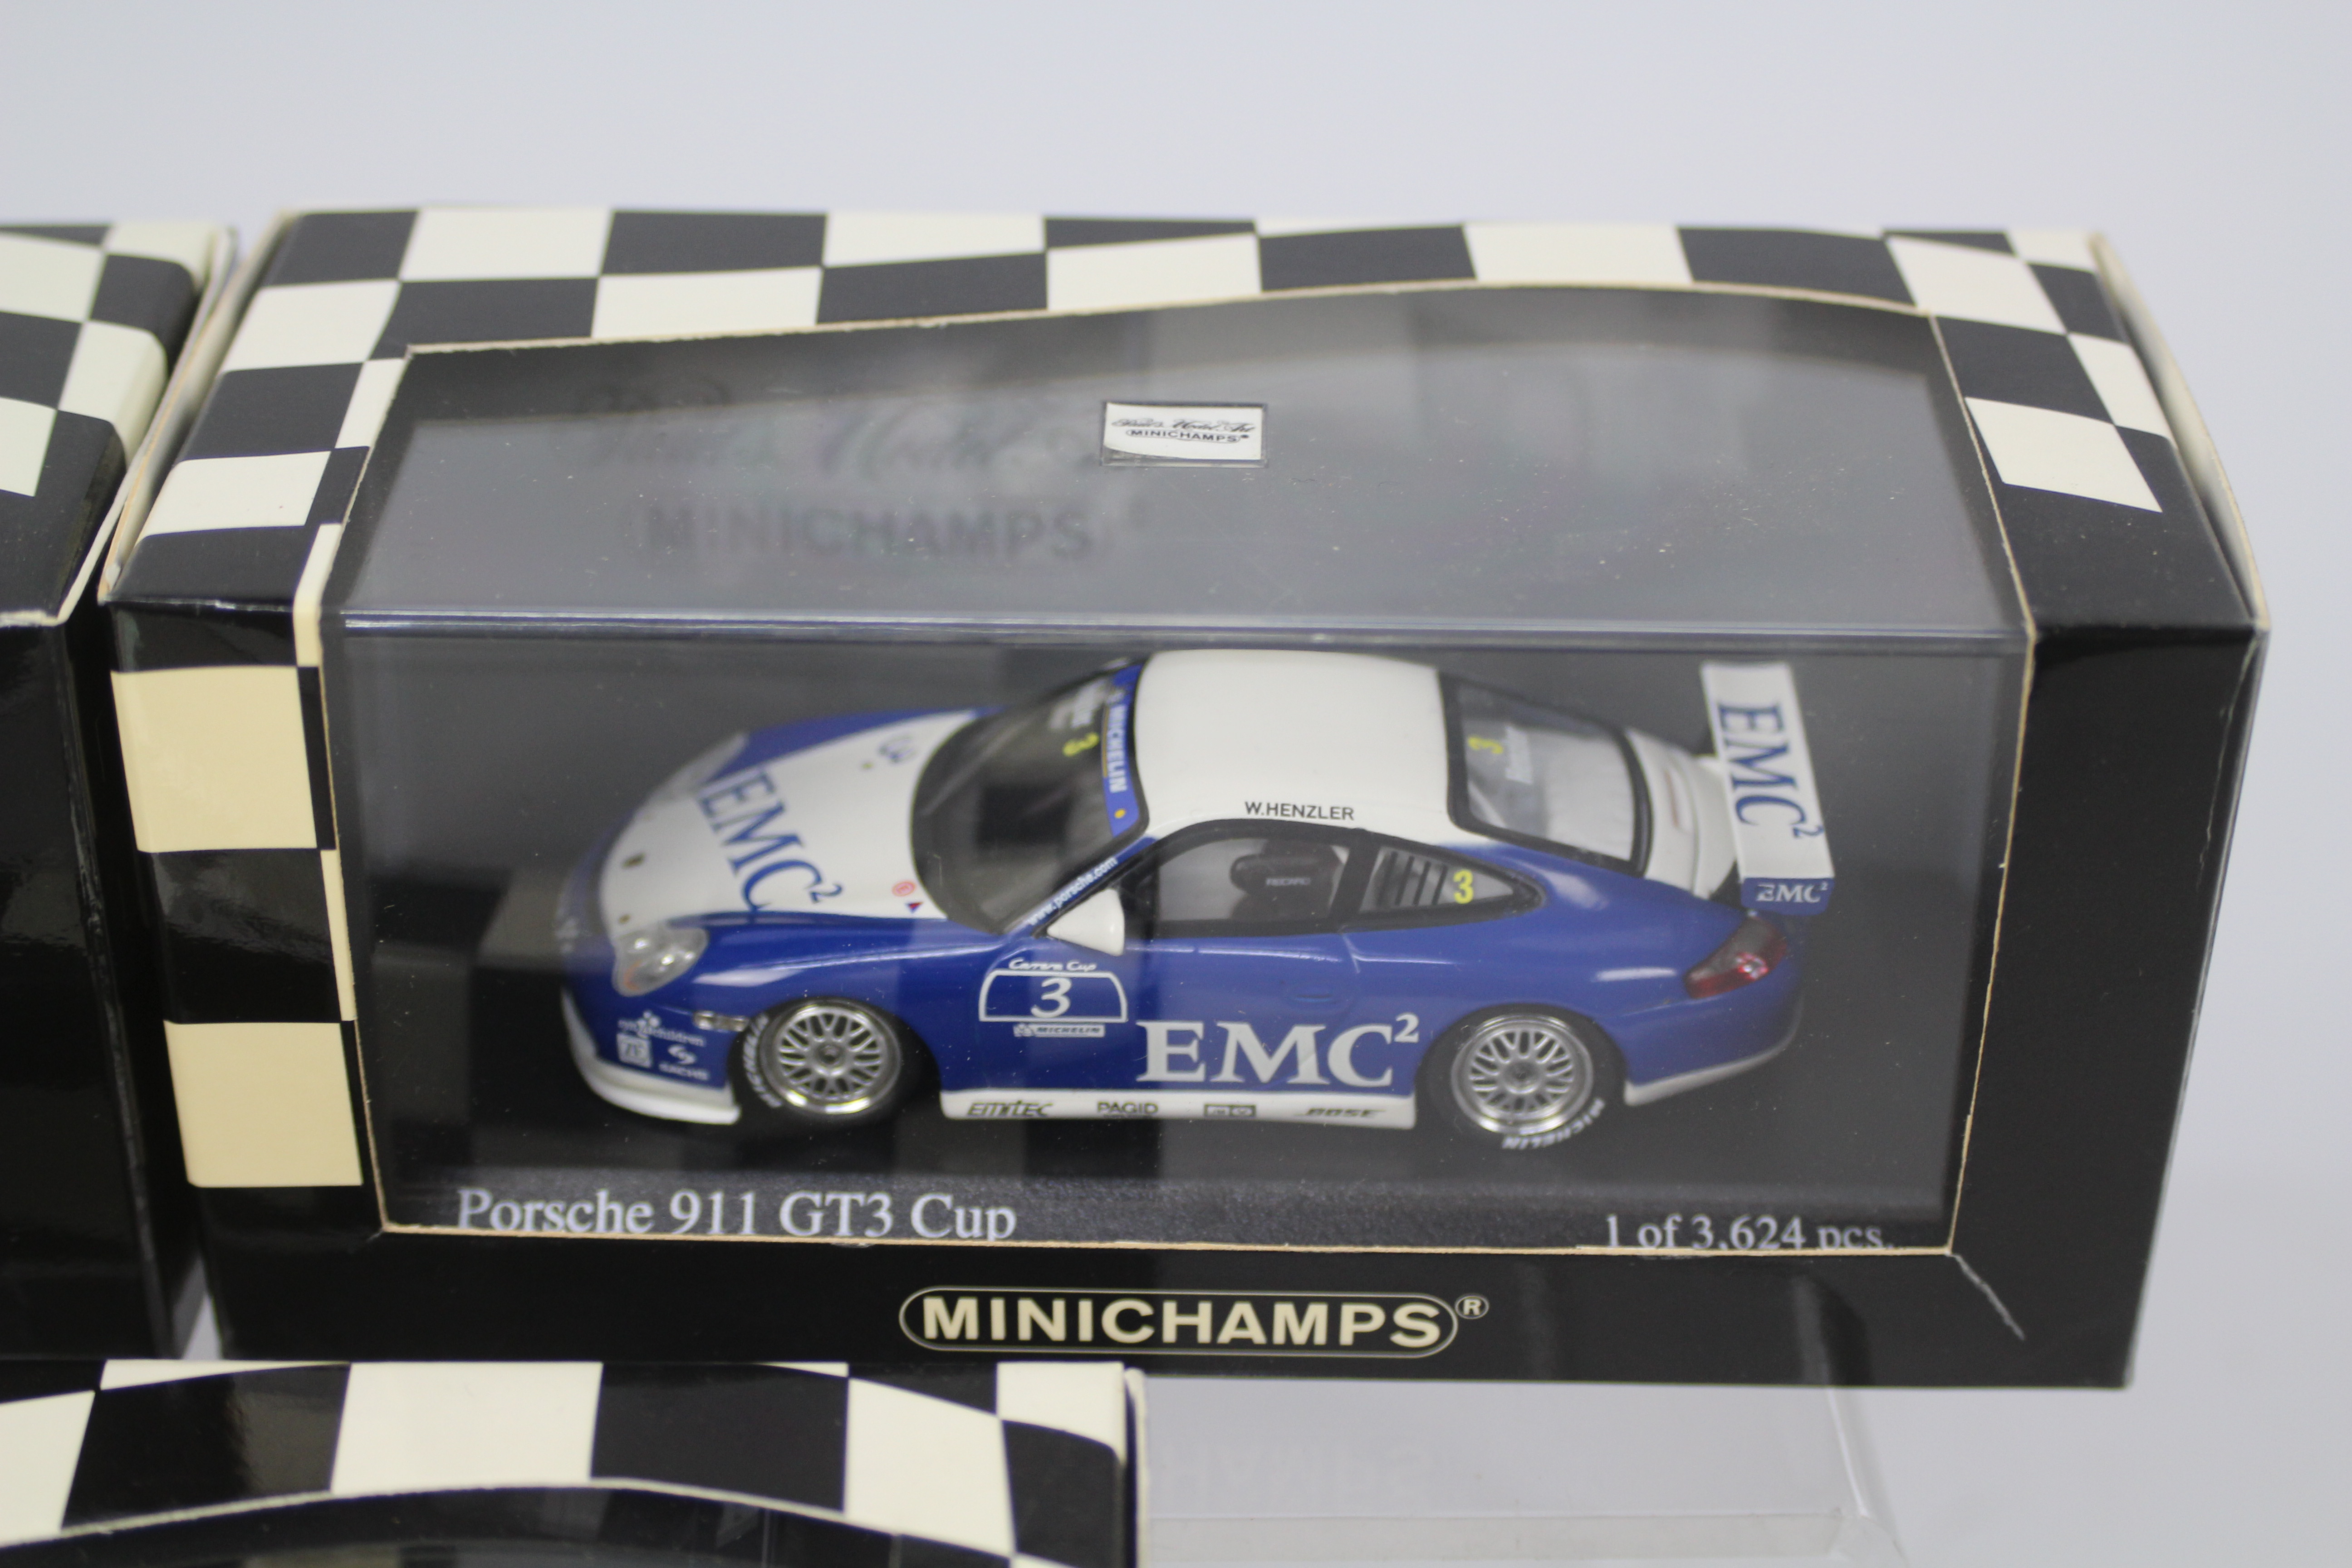 Minichamps - 3 x limited edition Porsche 911 models in 1:43 scale, a GT2 Evo, - Image 4 of 4